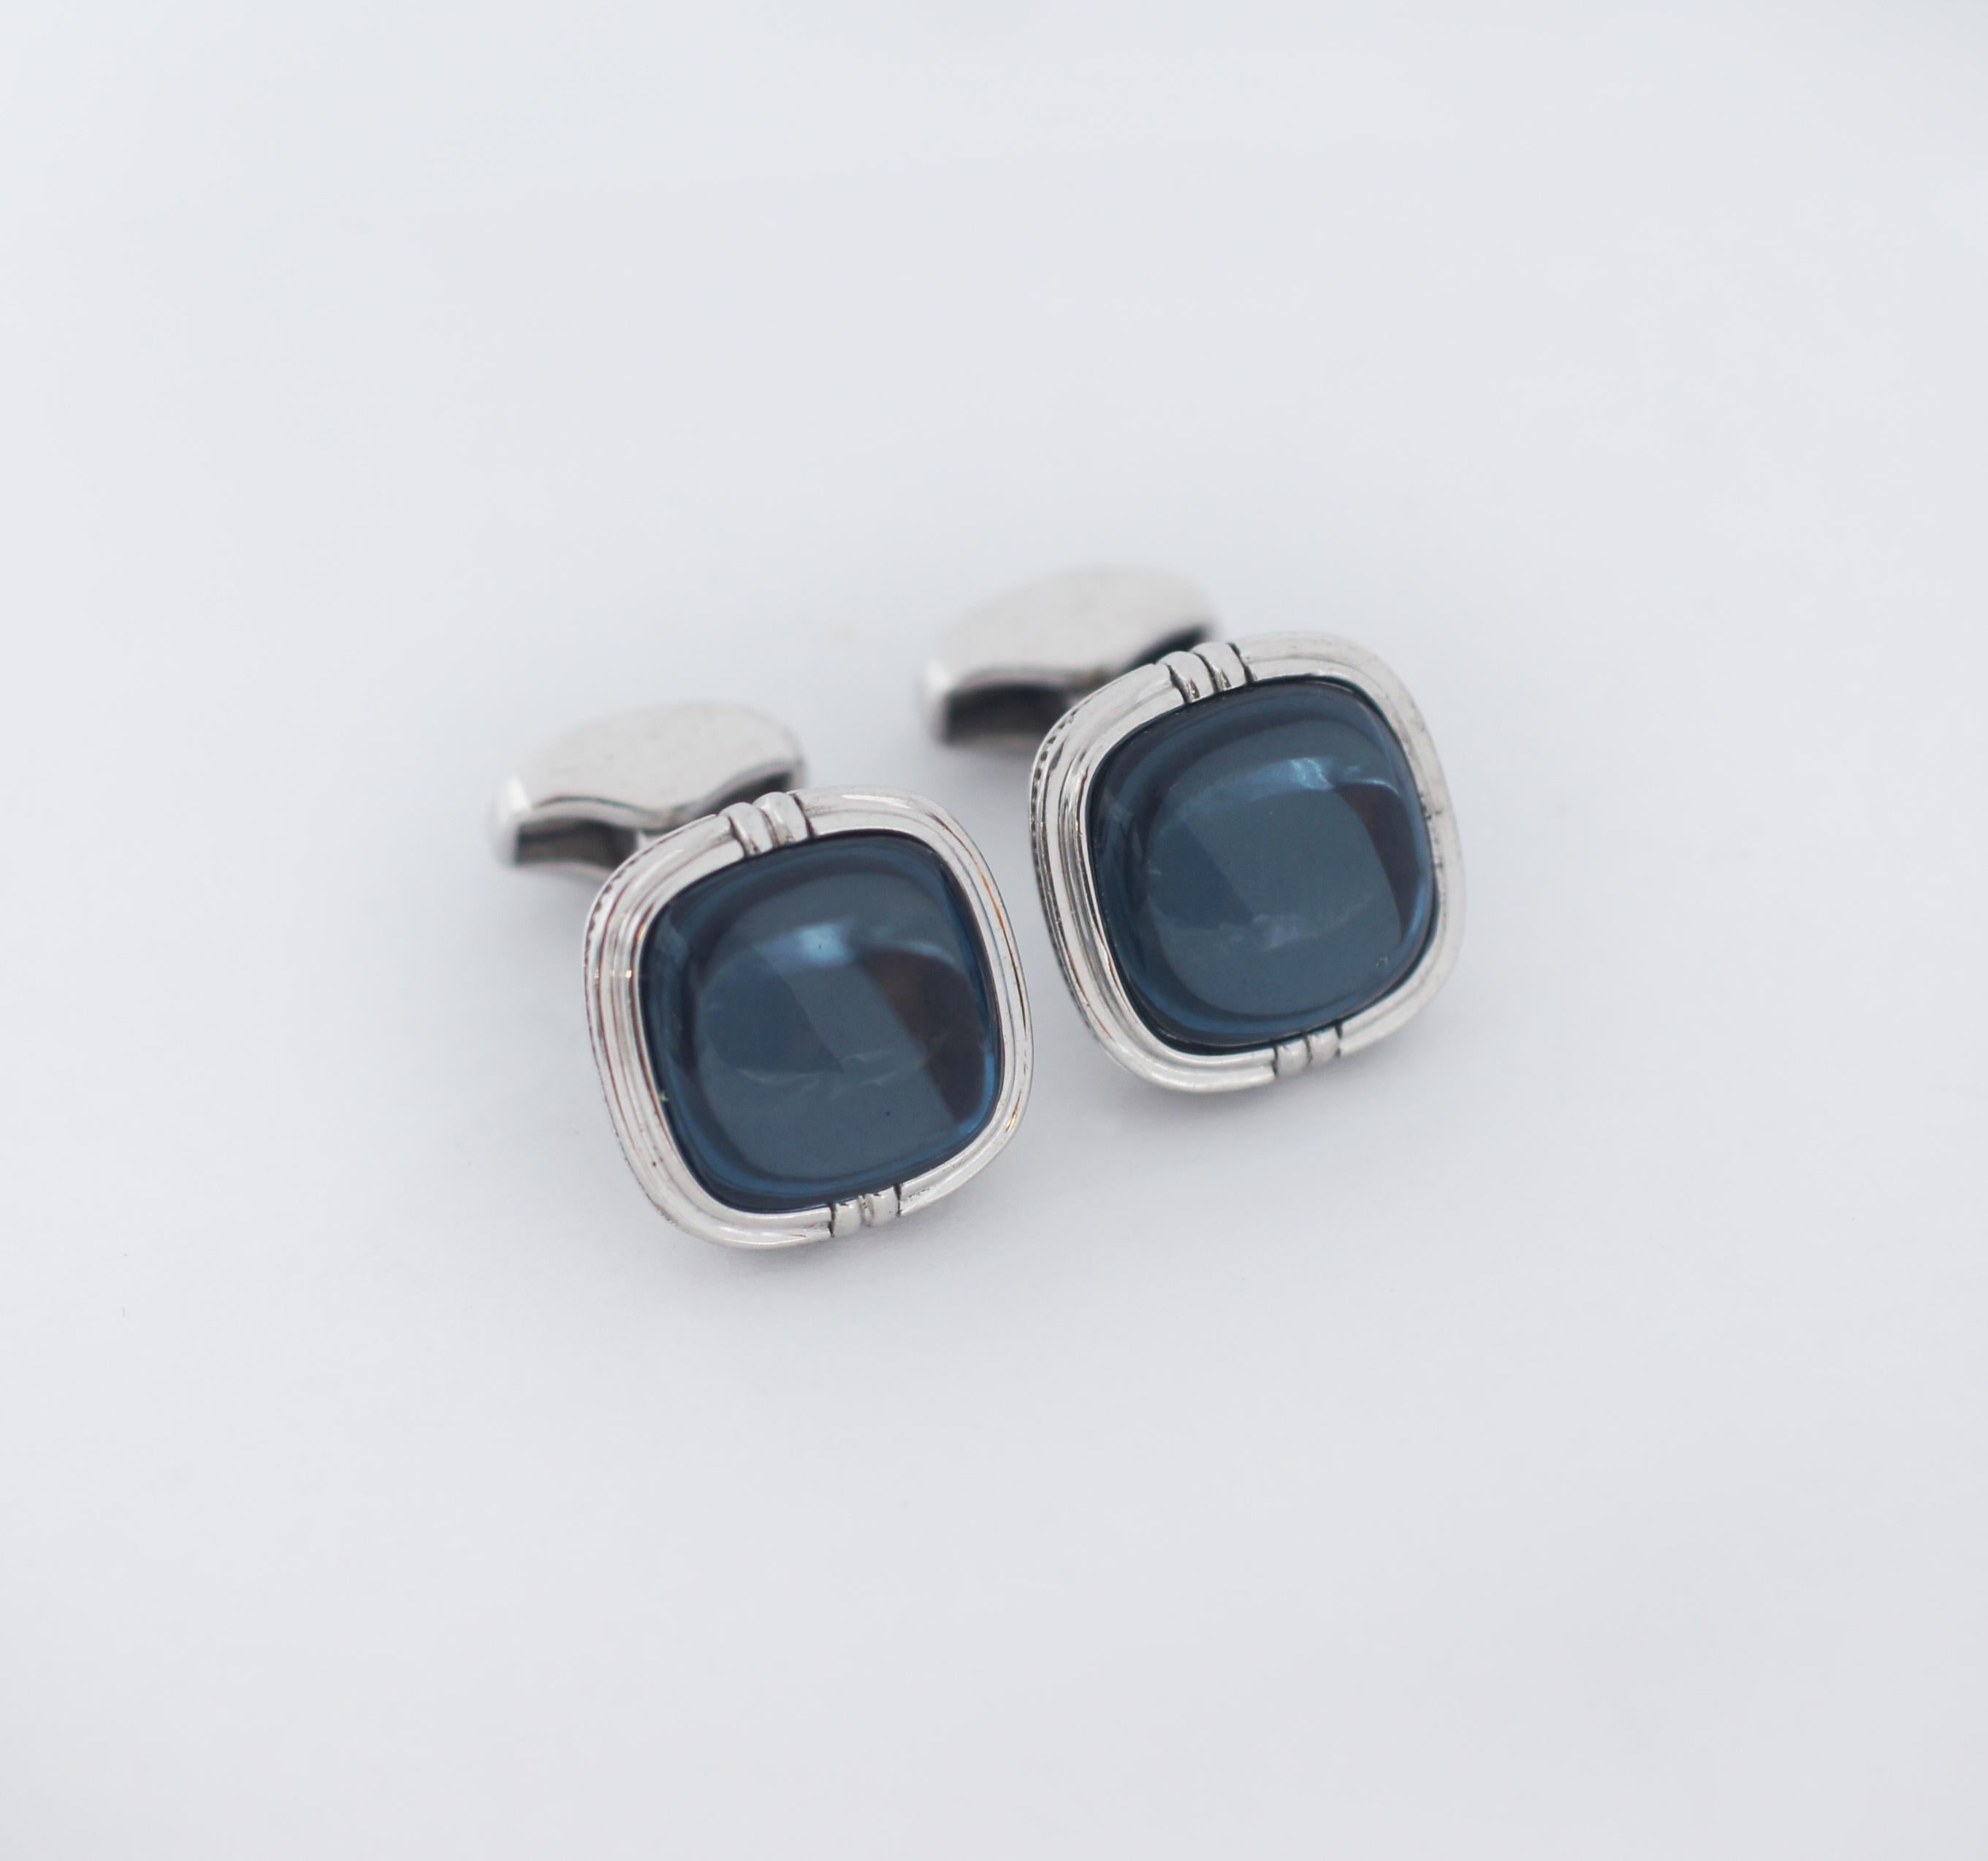 It's all in the details with these sophisticated silver and sky blue topaz over hematite cuff links. The Tacori Gentleman will step out in style with these bold statement pieces
TACORI
925 Silver
Cabochon
Sky Blue Topaz Over Hematite
Cuff Links
In